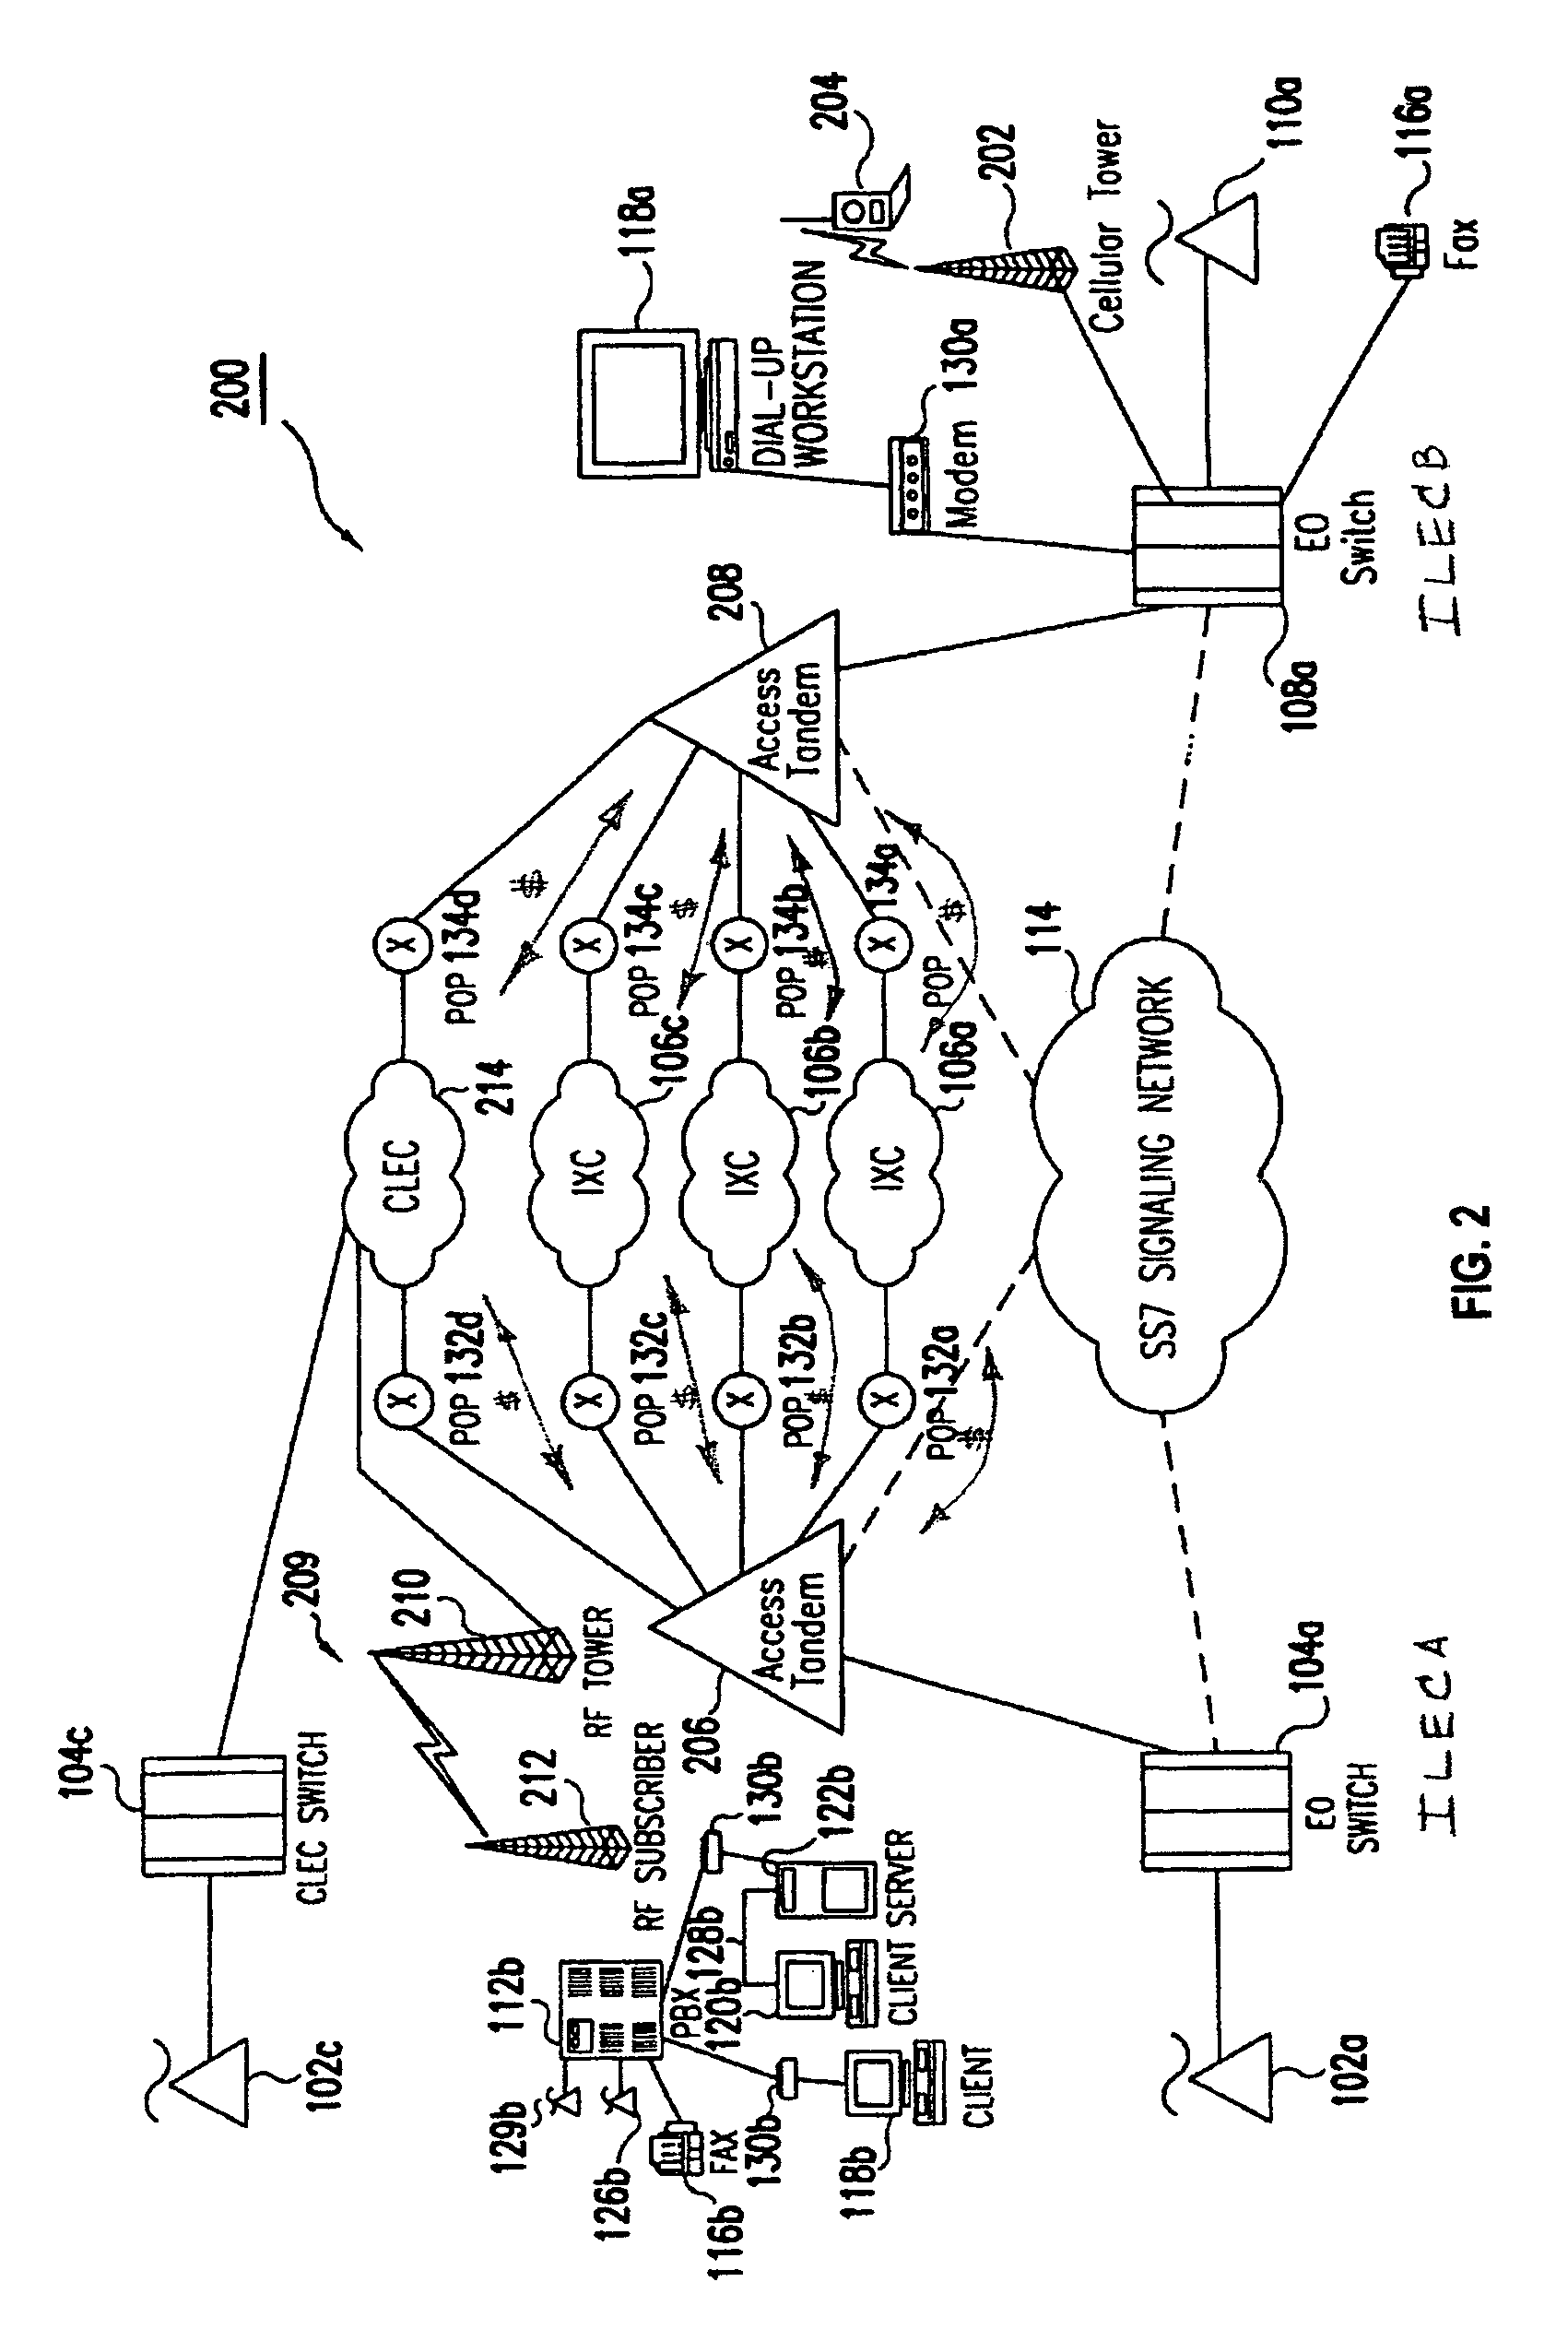 System and method for intelligent data extraction for telecommunications invoices